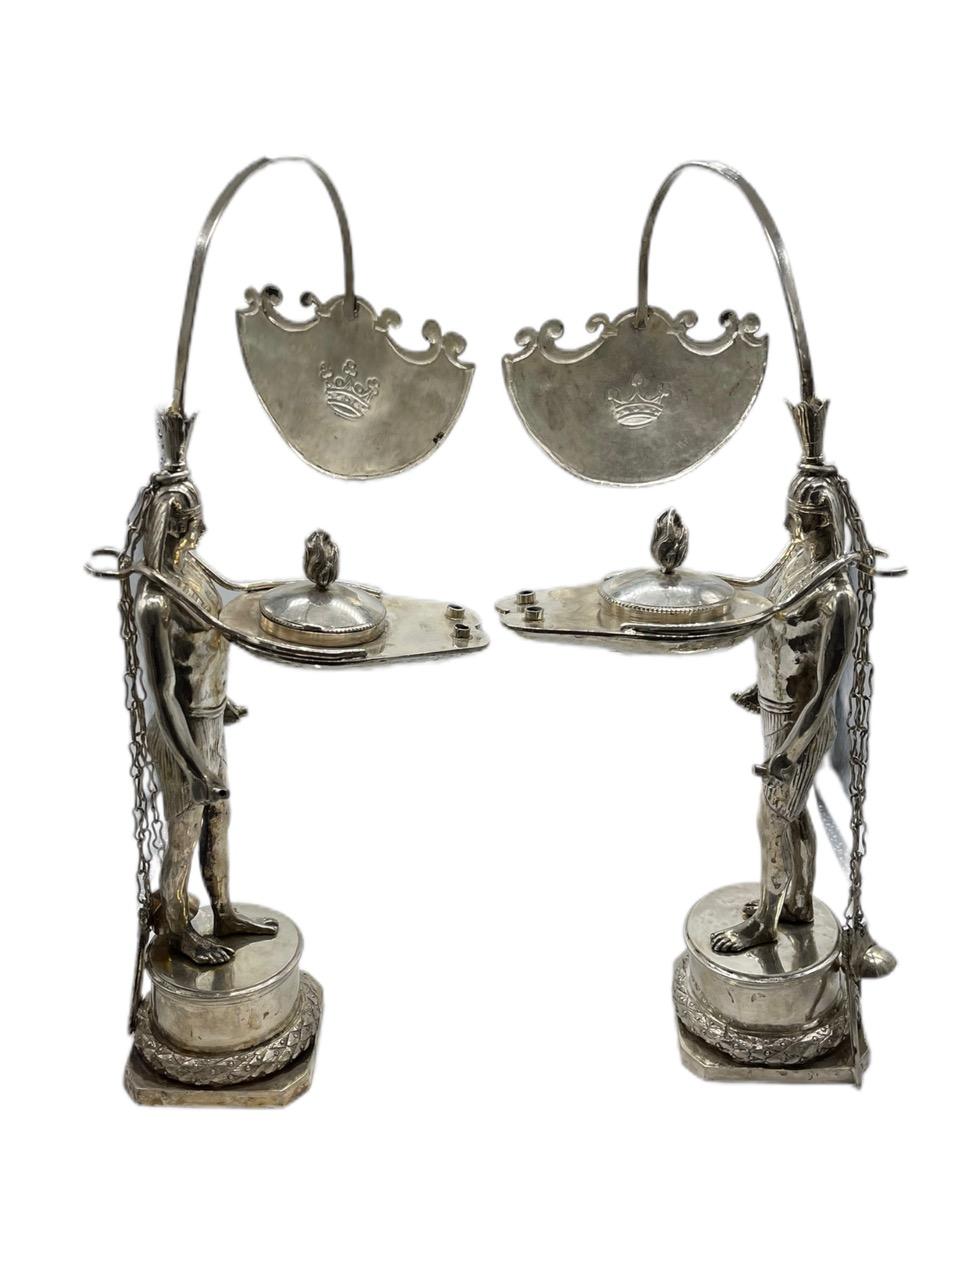 Pair of Early 19th Century Italian Antique Silver Oil Lamps by Vincenzo Belli II 9